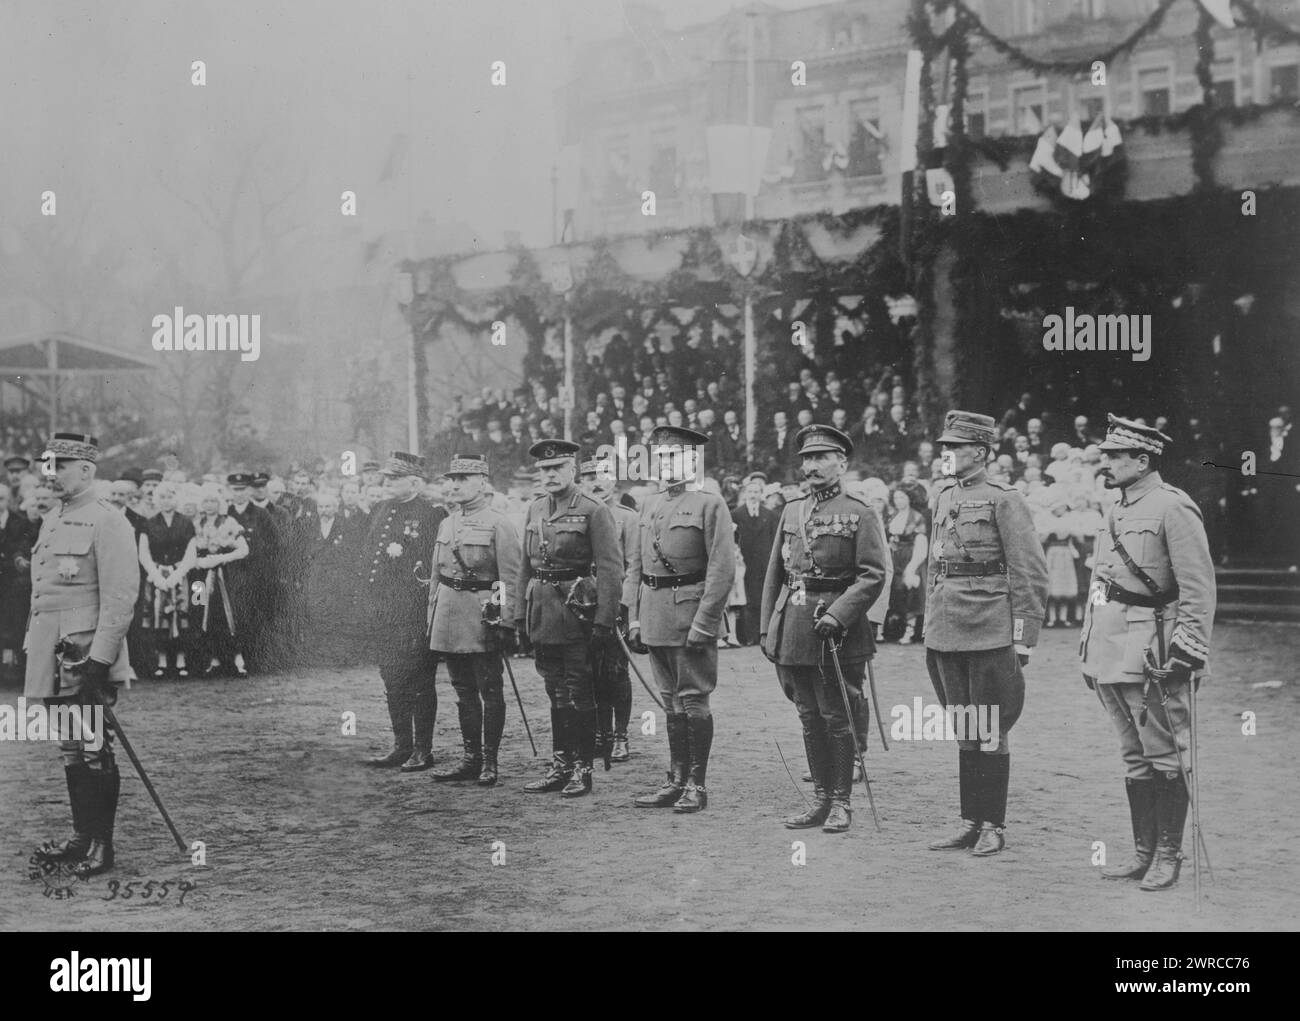 Generals, Metz, Photograph shows French military ceremony in Metz, France when President Poincare presented the military baton of a marshal of France to General Pétain. Generals are left to right: Philippe Pétain, Joseph Joffre, Ferdinand Foch, Maxime Weygand, Douglas Haig, John J. Pershing, Cyriaque Gillain, Alberico Albricci, Józef Haller, 1918 Dec. 8, World War, 1914-1918, Glass negatives, 1 negative: glass Stock Photo